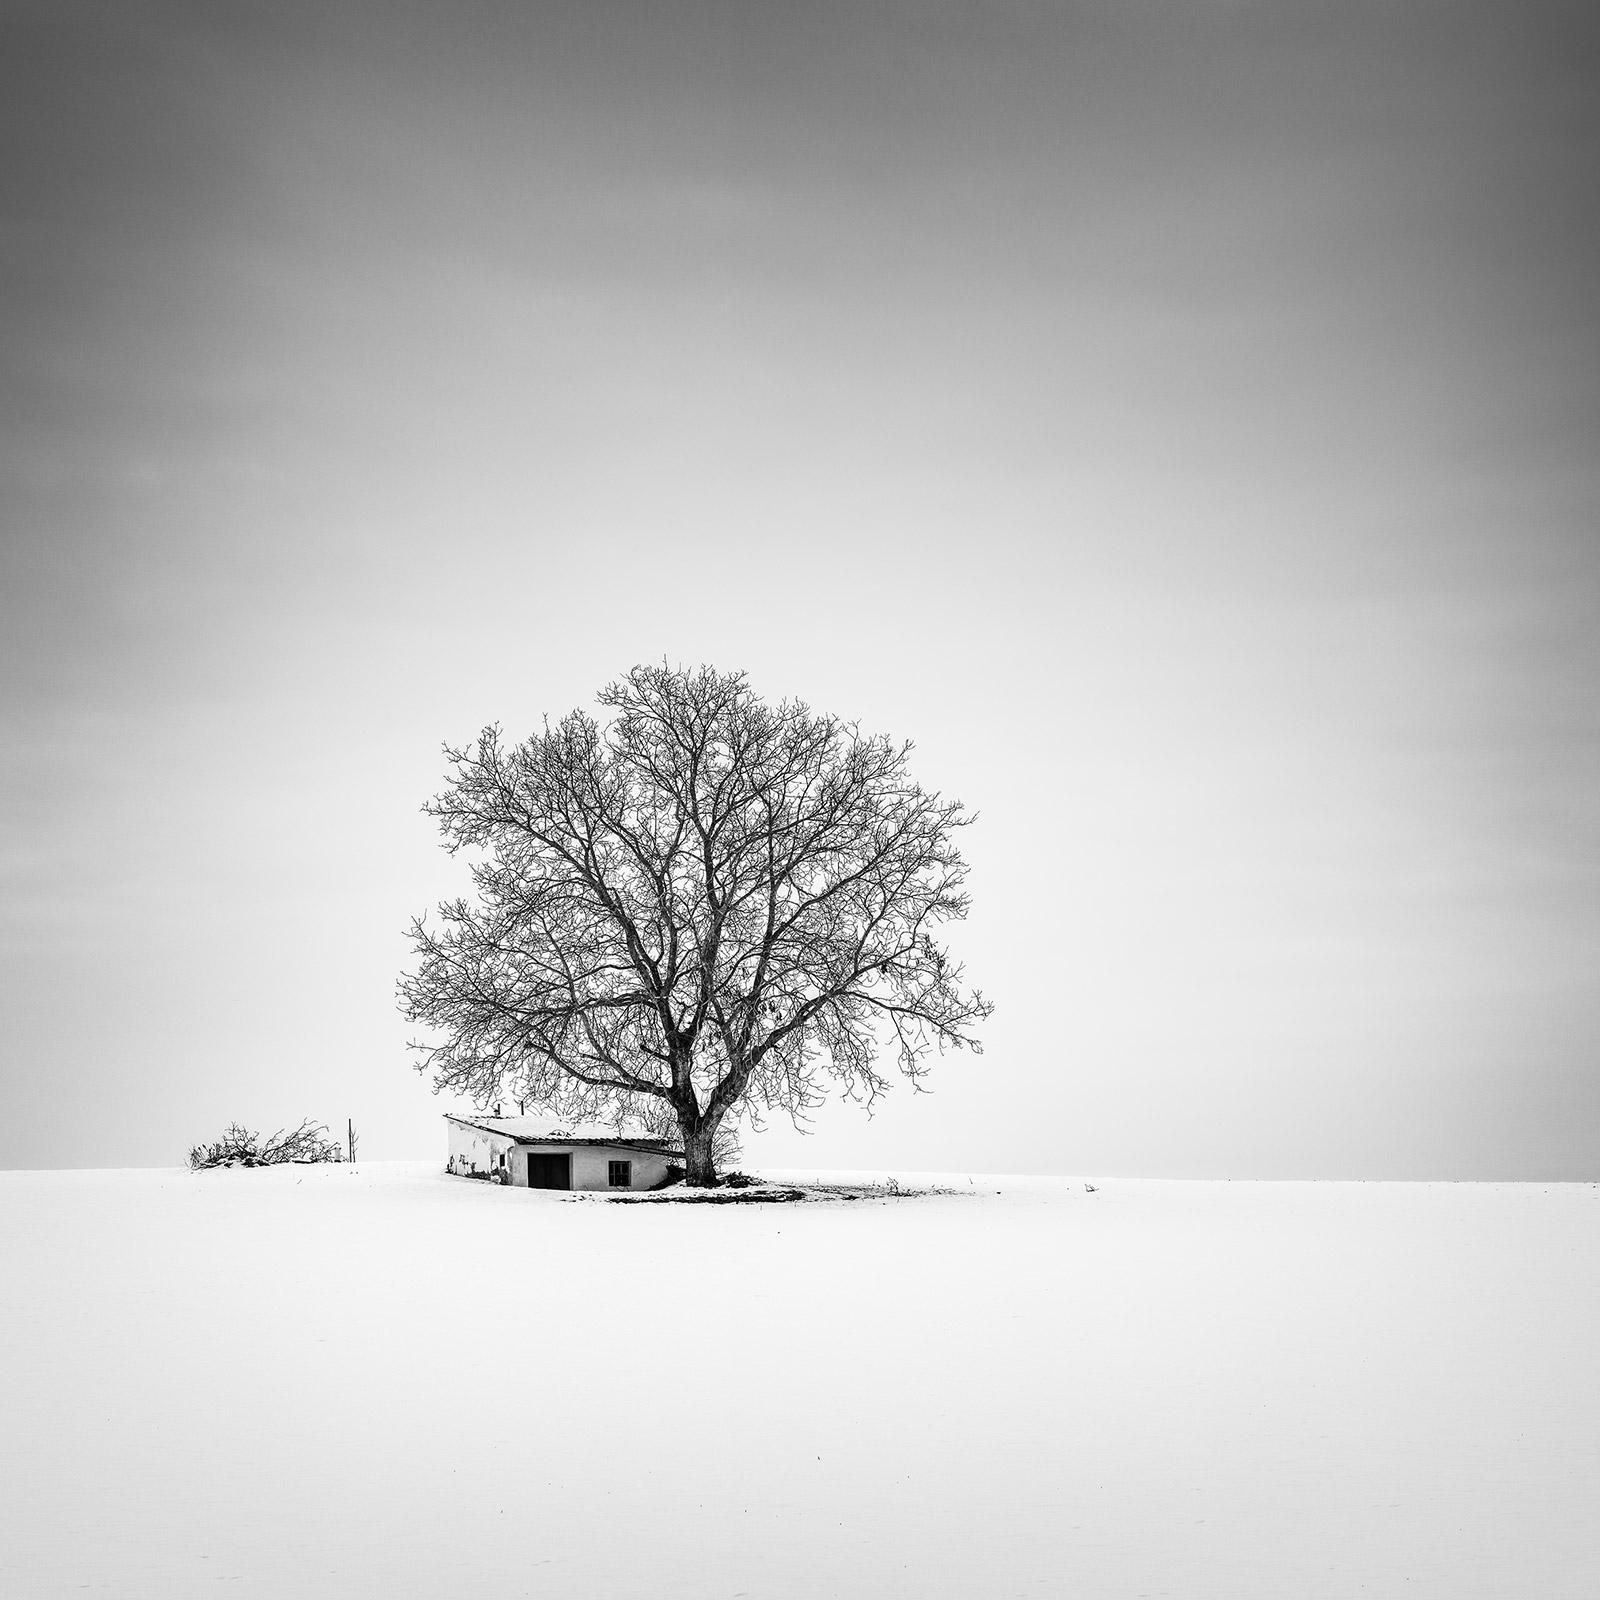 Gerald Berghammer Black and White Photograph - Wine Press House, snow, winter, black and white fine art landscape photography